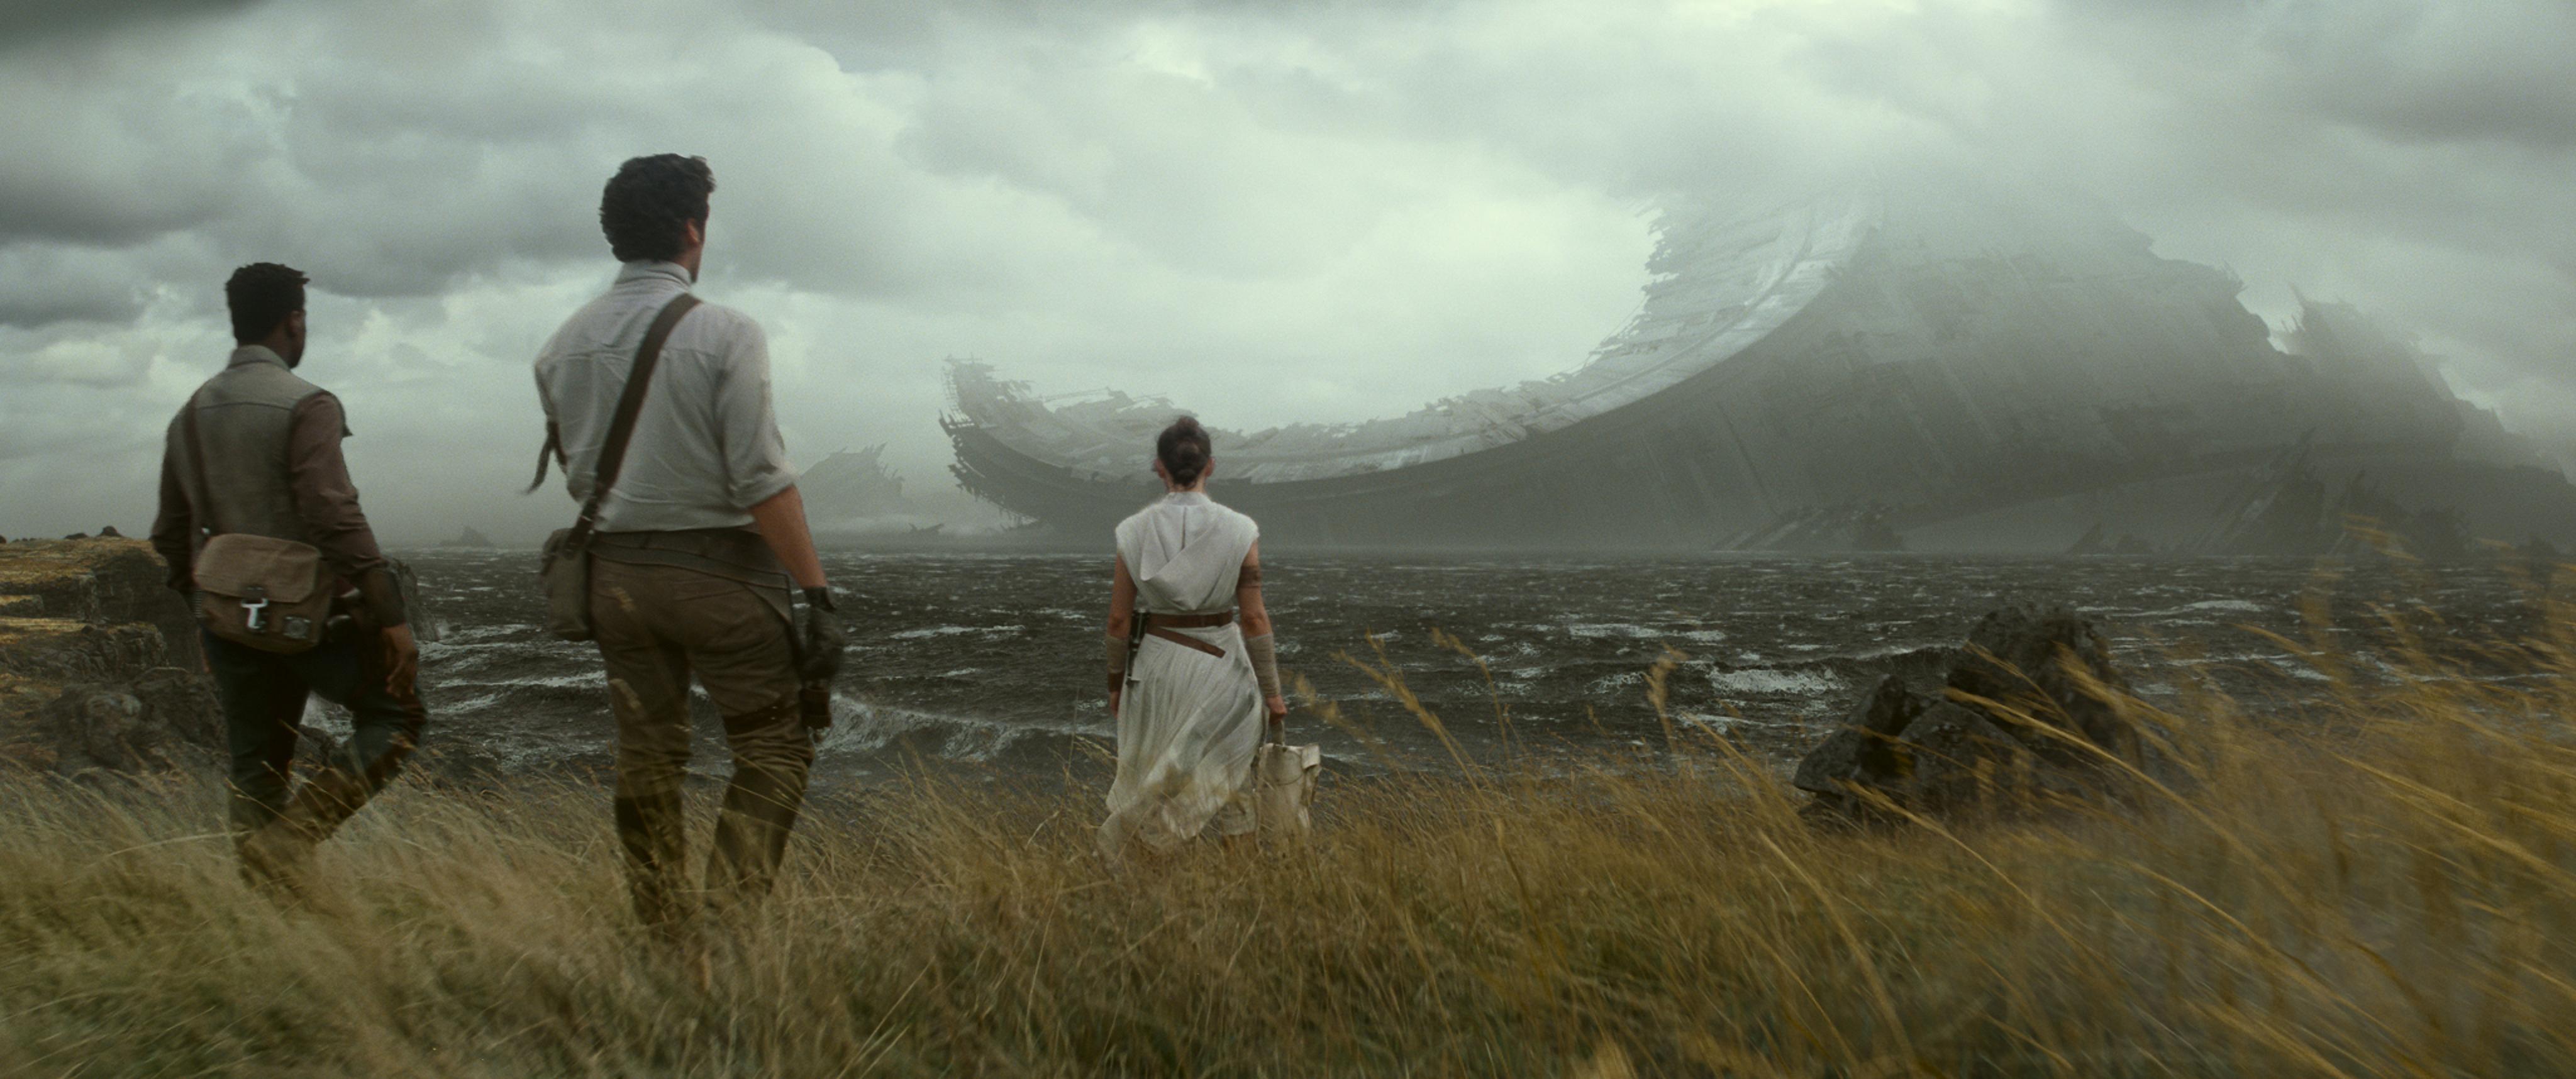 Star Wars: The Rise of Skywalker Poster and Image Revealed